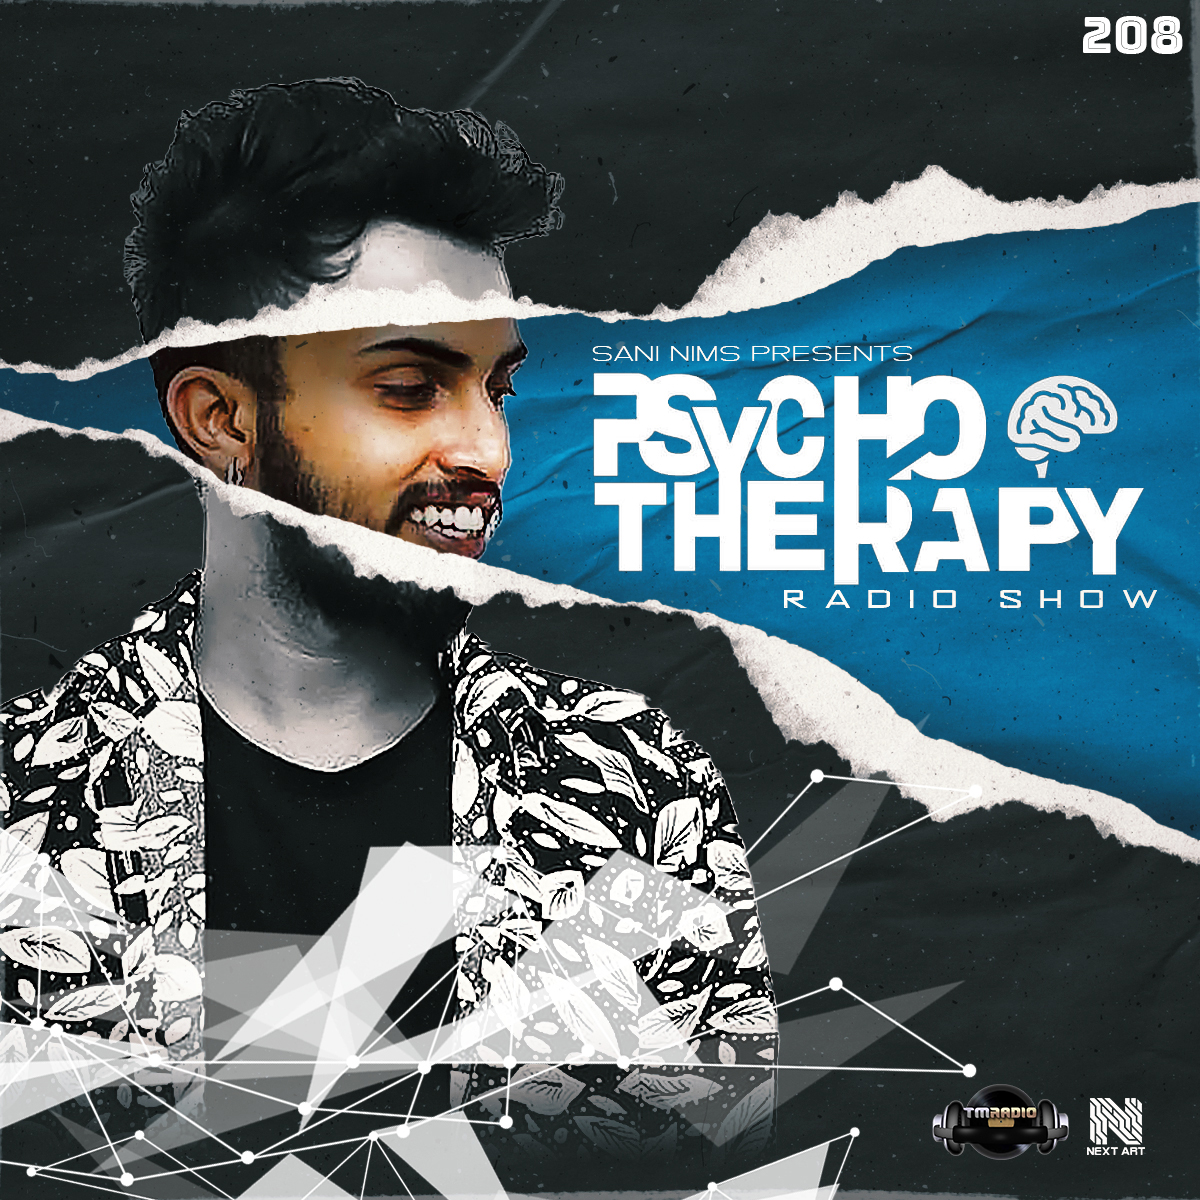 PSYCHO THERAPY EP 208 BY SANI NIMS ON TM RADIO (from September 28th)